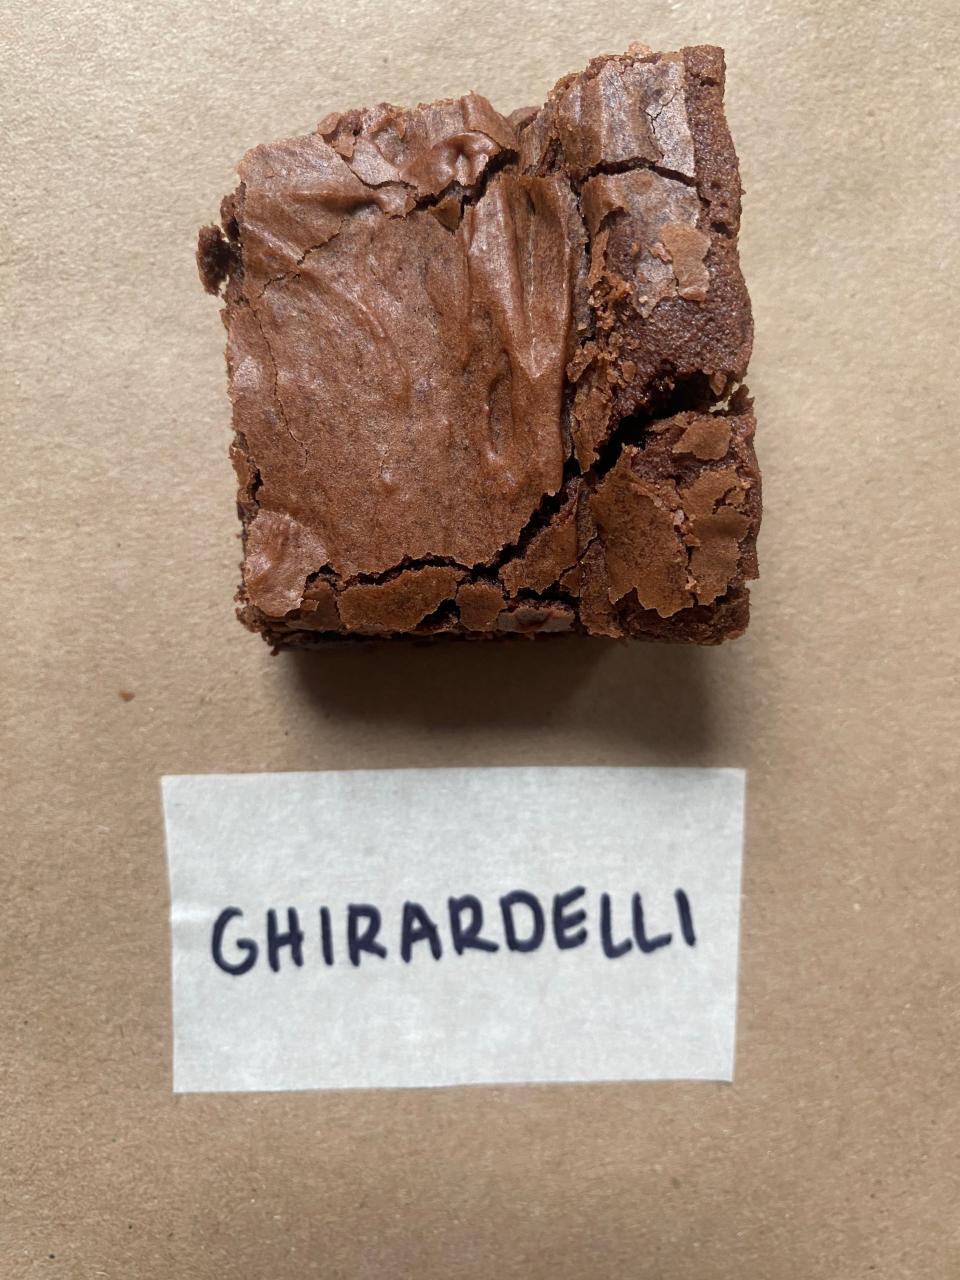 A Ghirardelli brownie with a cracked top is placed above the brand's name label